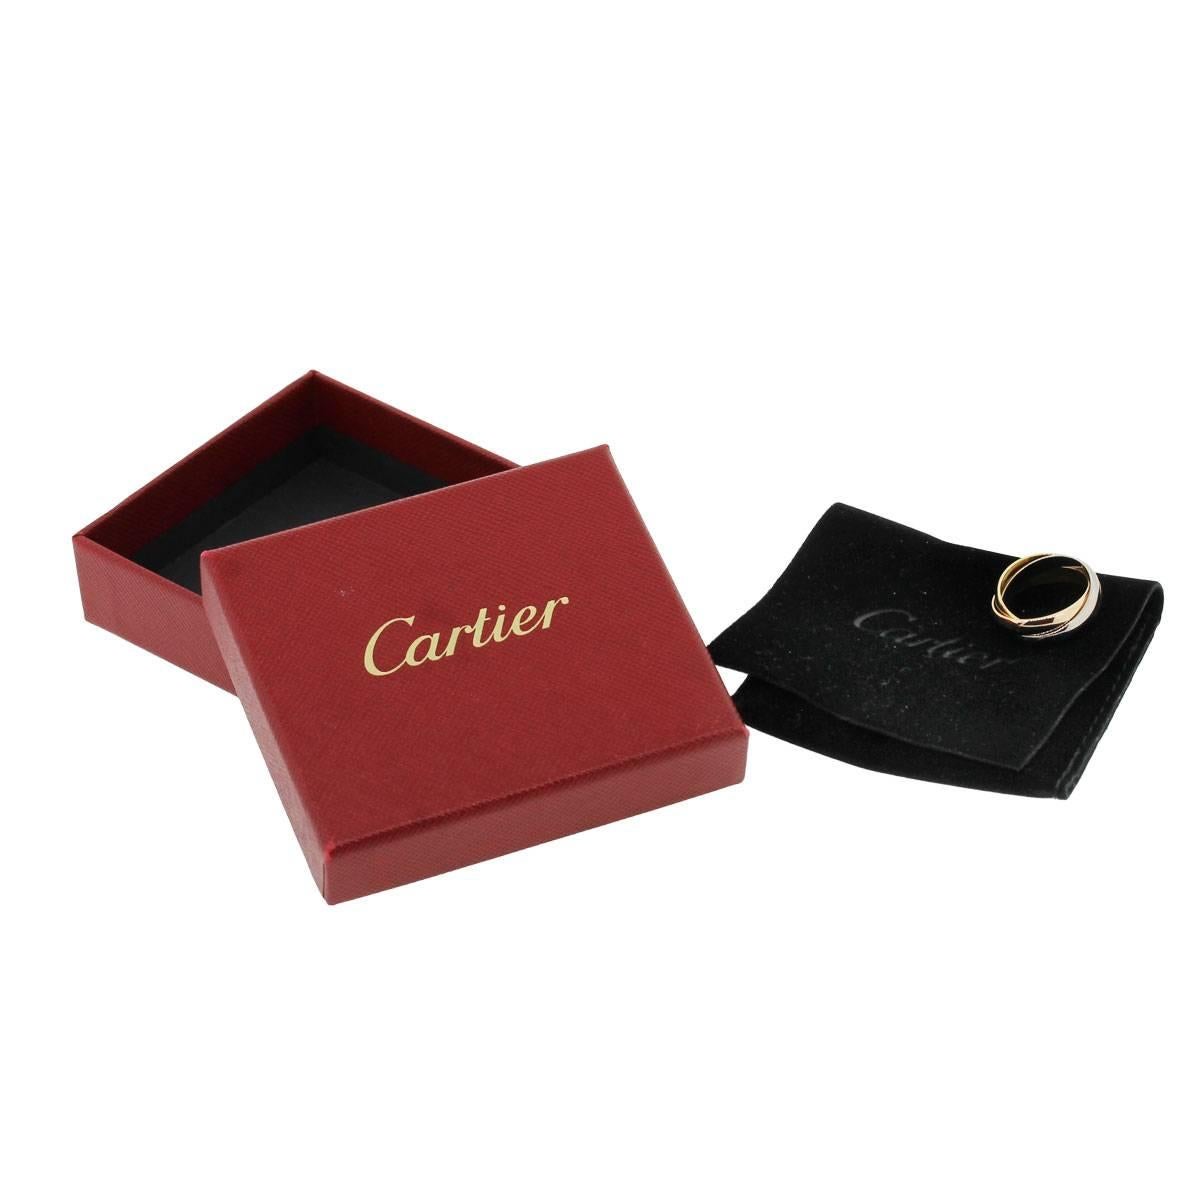 Designer
Cartier
Material
18k white, yellow and rose gold
Ring Size
Size 52 (5.75)
Total Weight	8.4g (5.3dwt)
Measurements
0.87" x0.28" x 0.87"
Additional Details	Comes with Cartier box and pouch!
SKU
R3706
